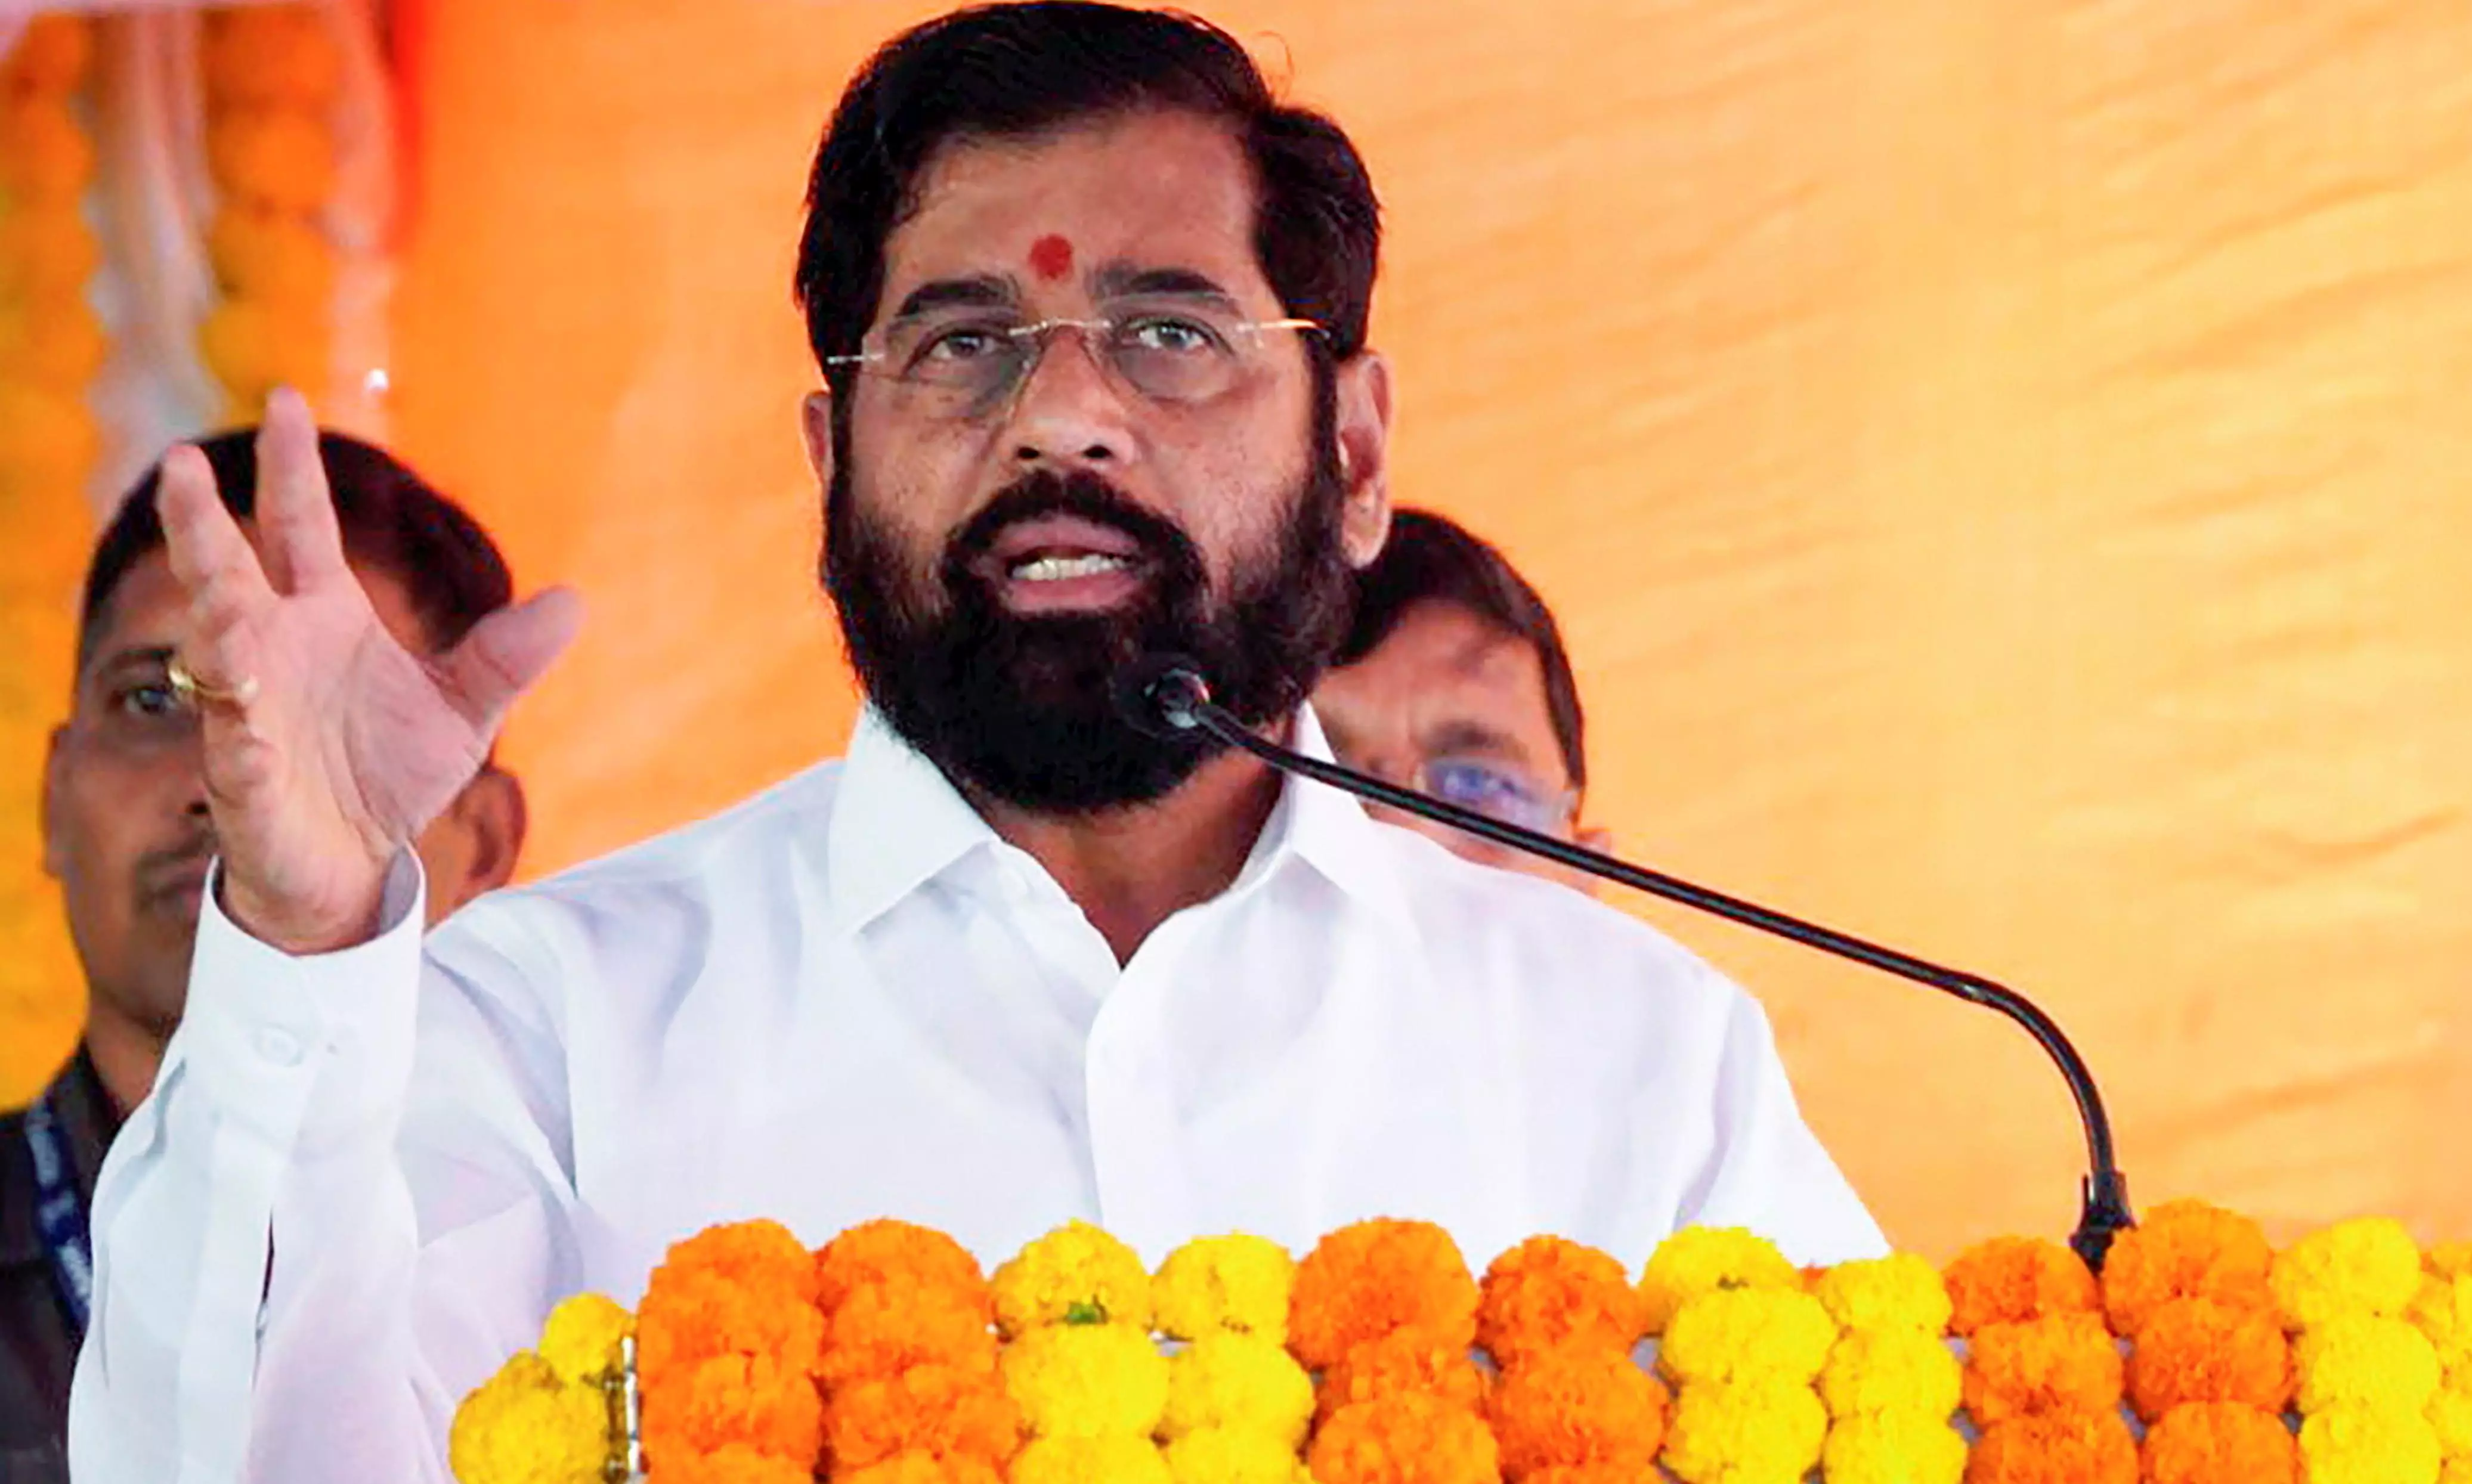 After Uddhav’s Aurangzeb Jibe, BJP Says People Will Teach Him Lesson